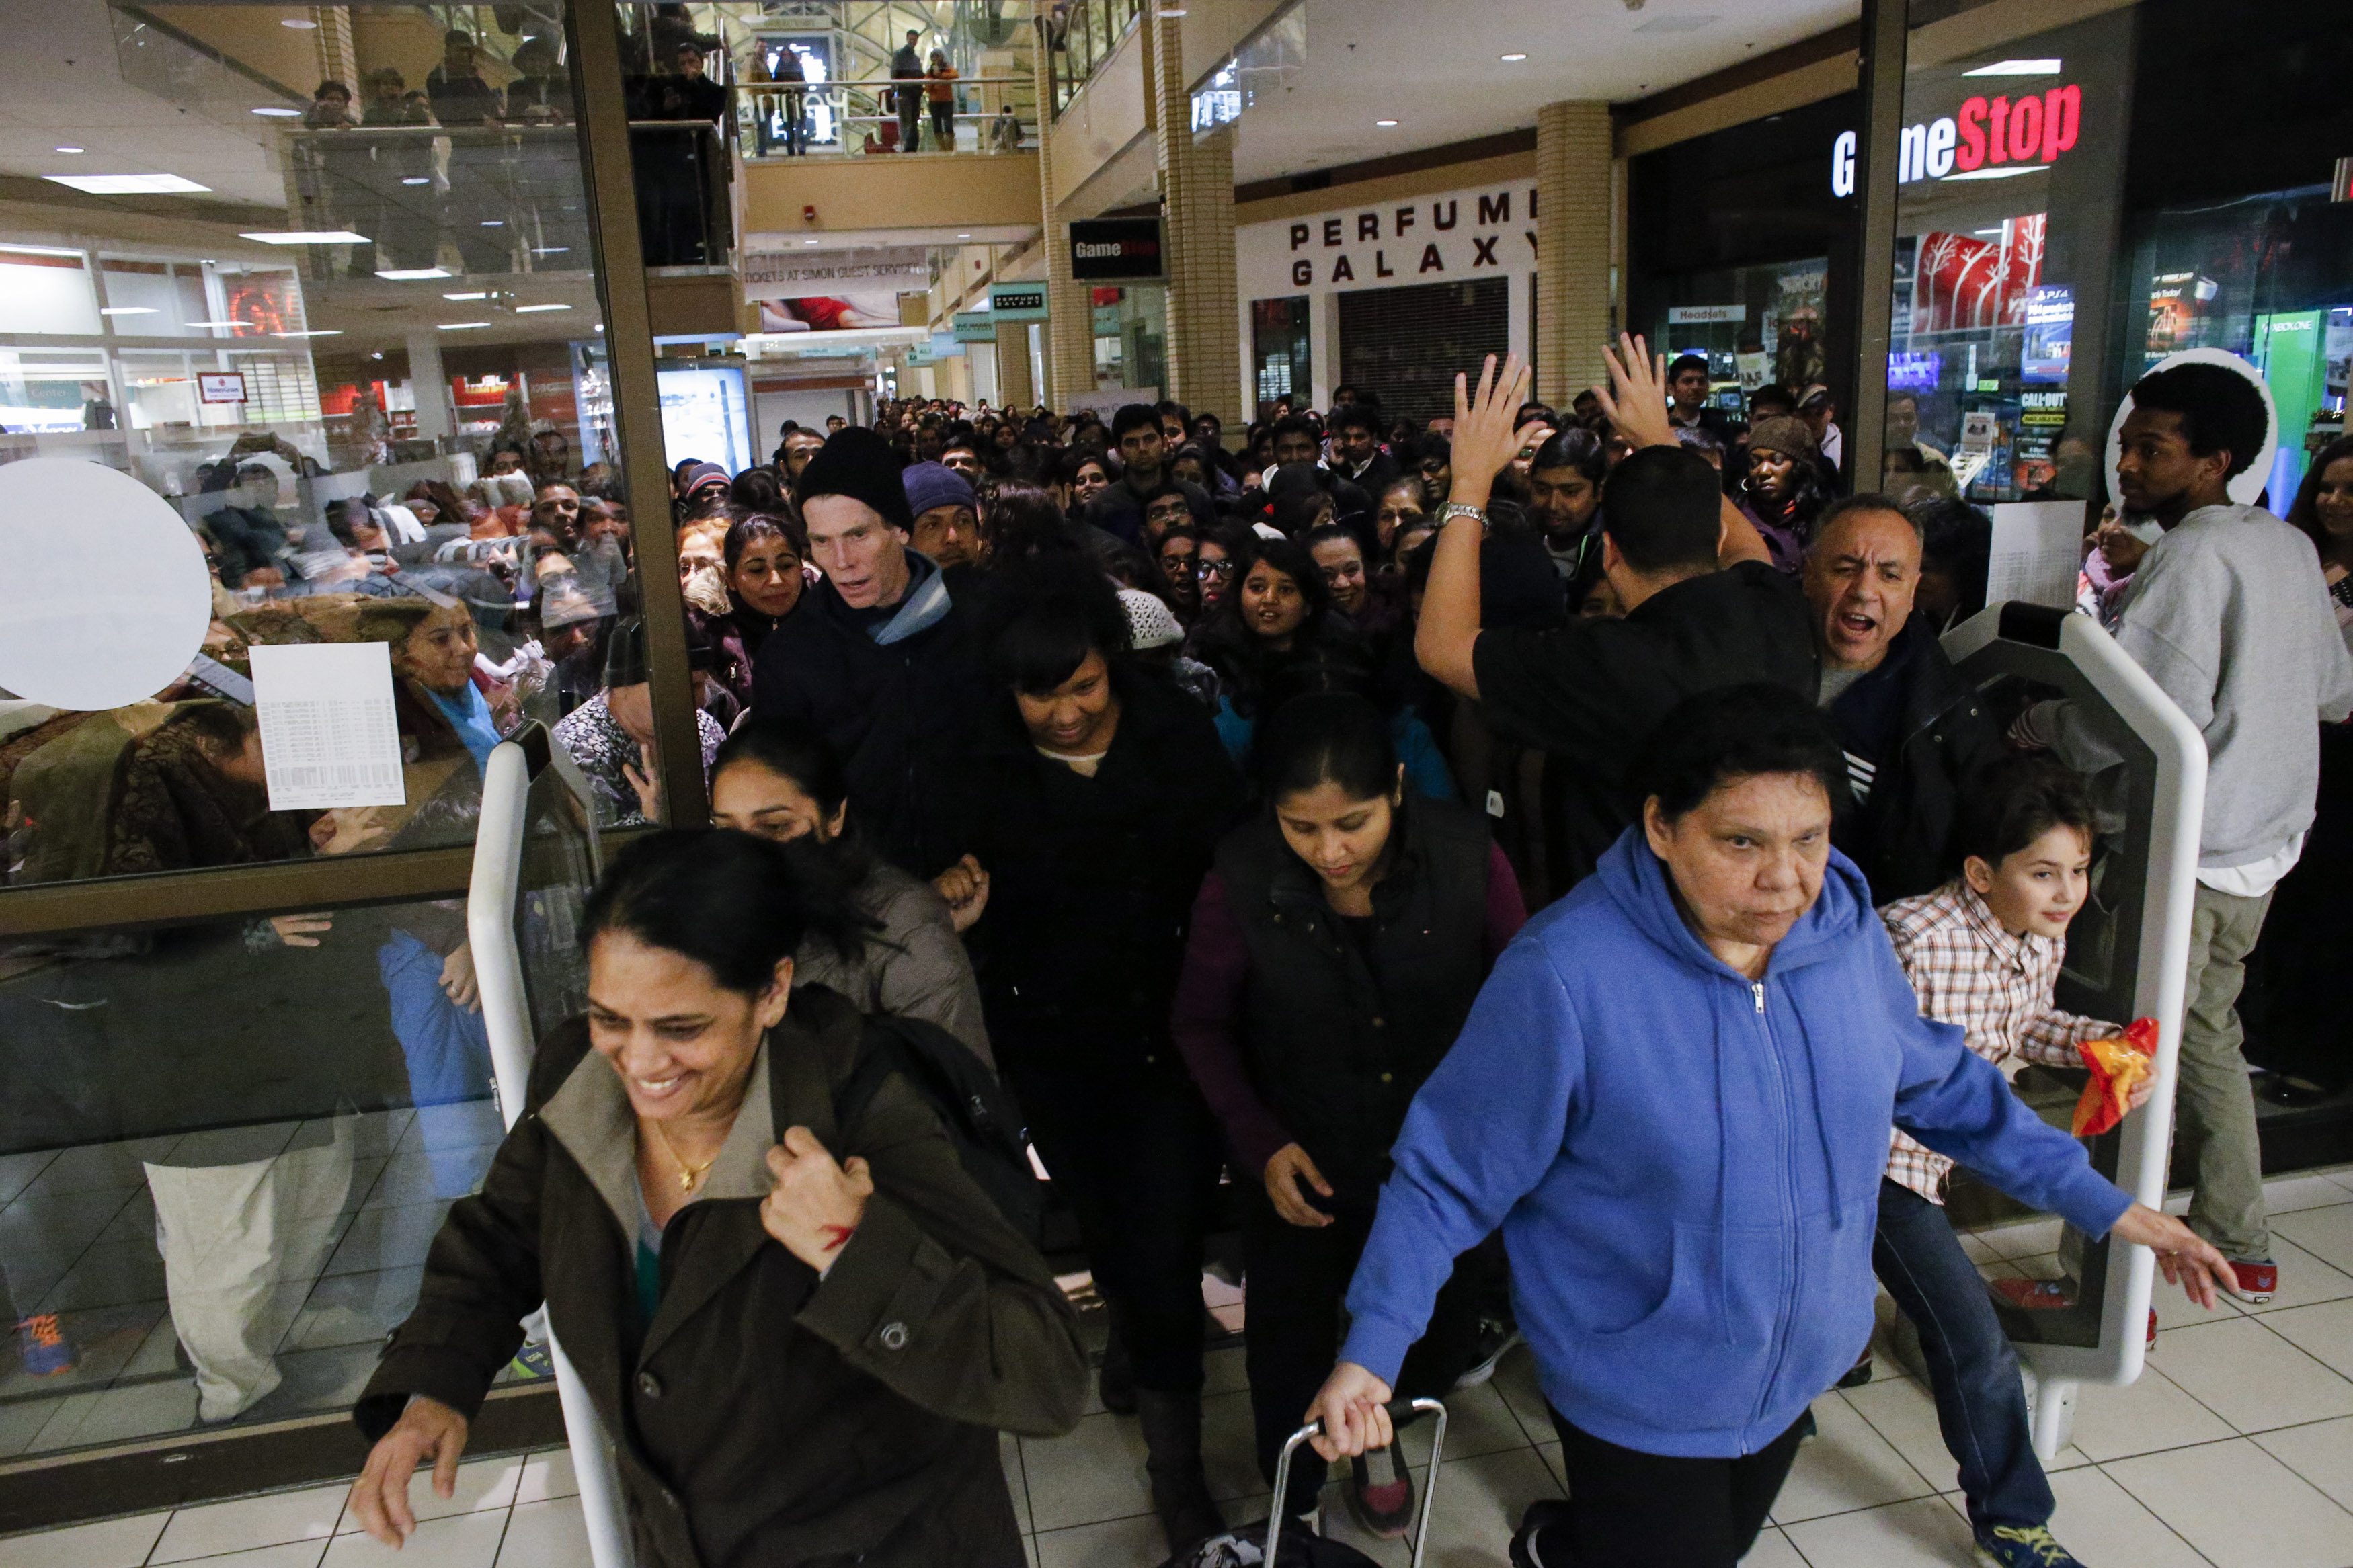 NEWPORT, NJ - NOVEMBER 27: People enter to JCpenny store on the Newport Mall on November 27, 2014 in Jersey City , New Jersey, United States. Black Friday sales, which now begin on the Thursday of Thanksgiving, continue to draw shoppers out for deals and sales. (Photo by Kena Betancur/Getty Images)